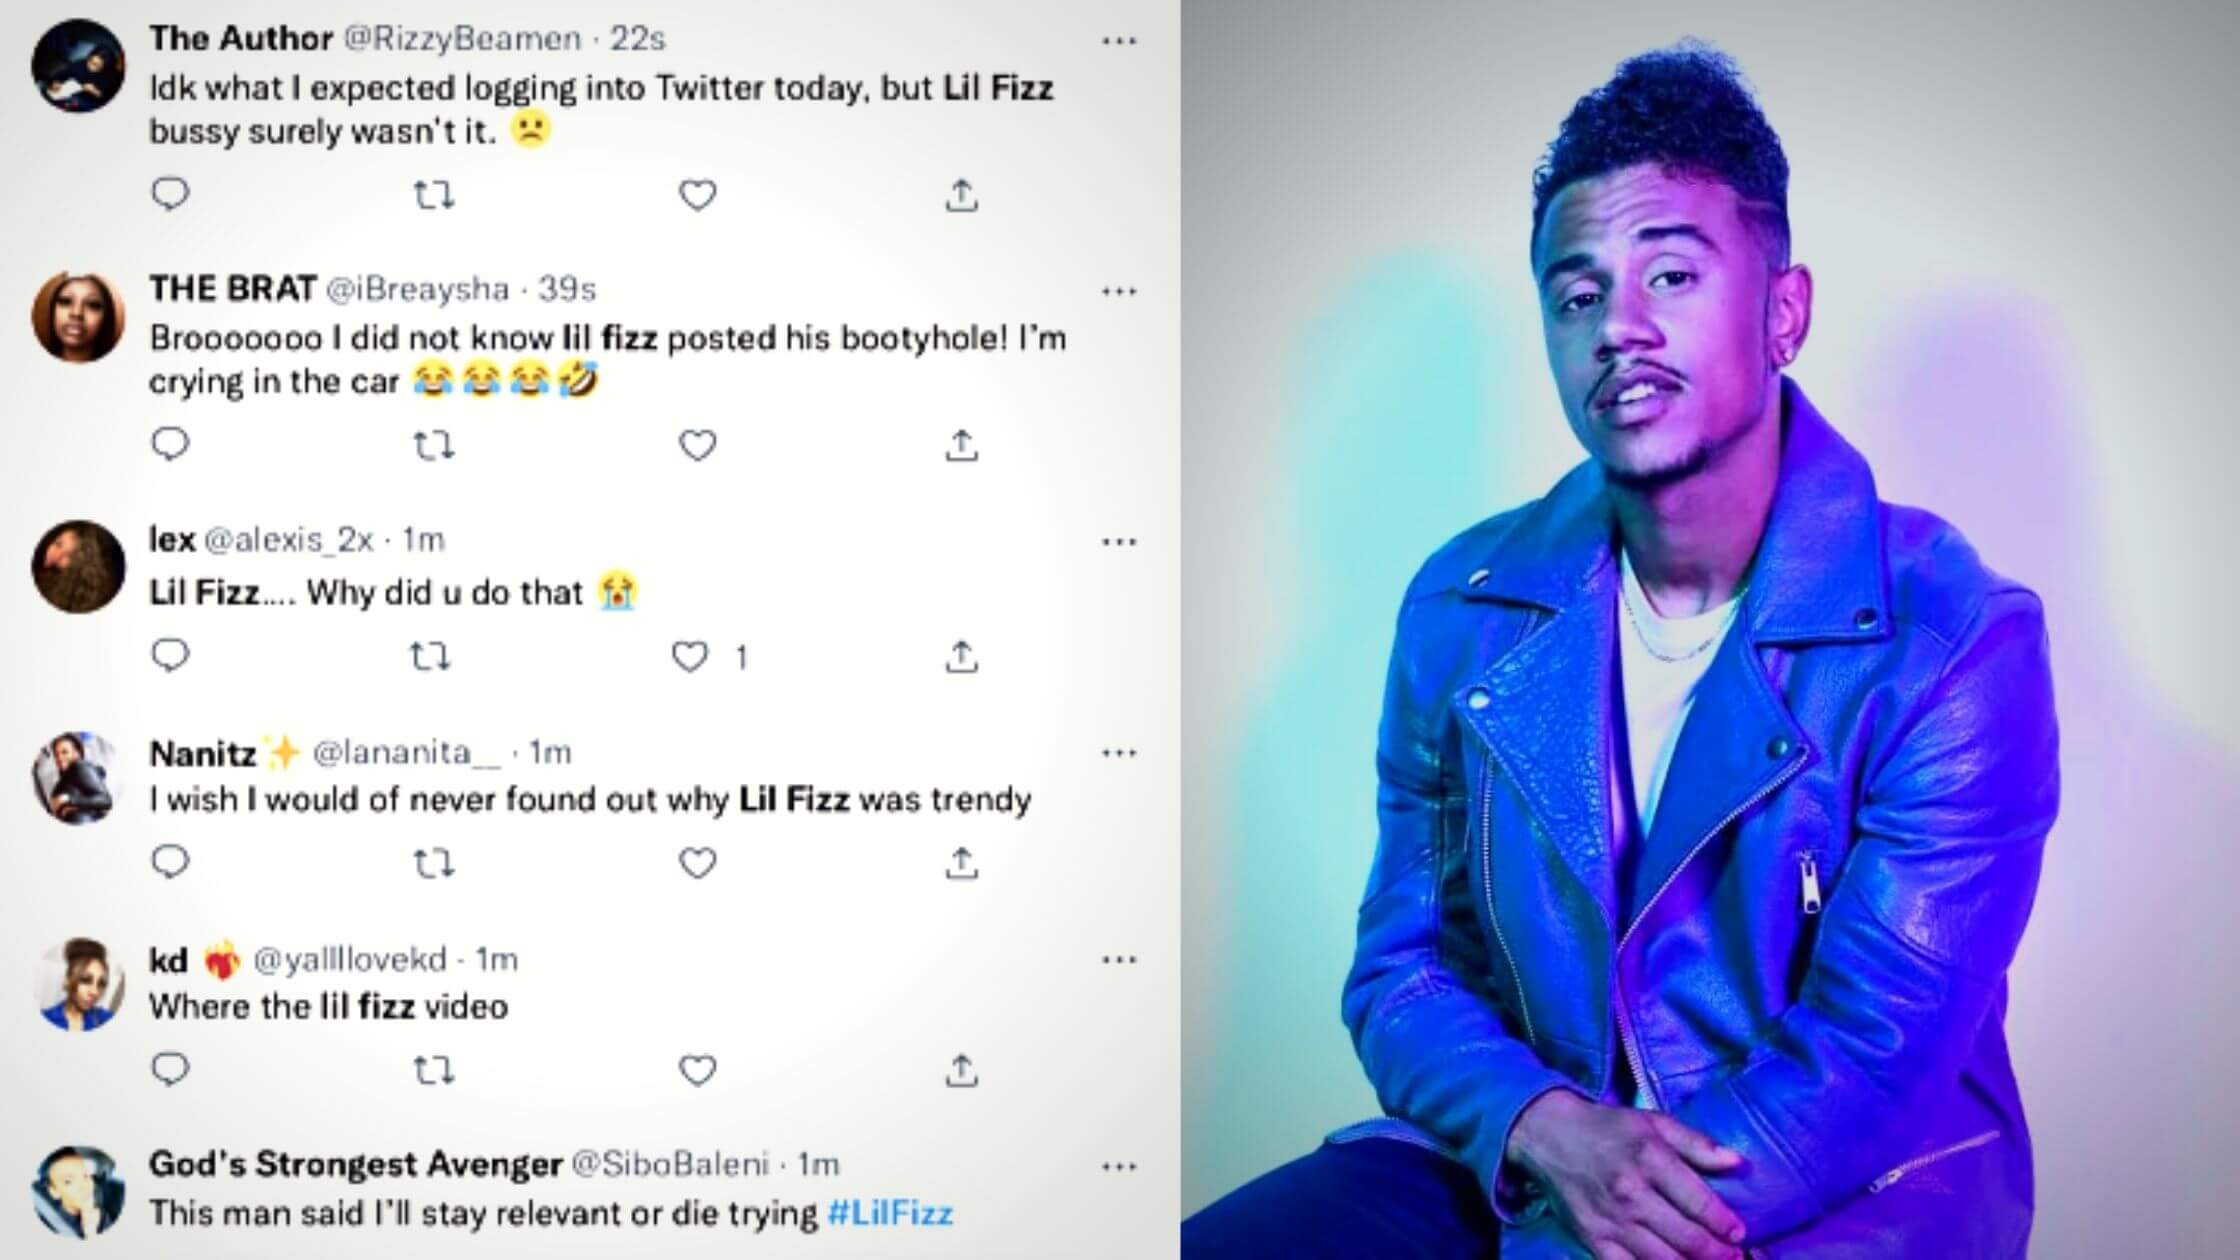 Lil Fizz's Alleged Nude Tweets Cause A Stir On Social Media